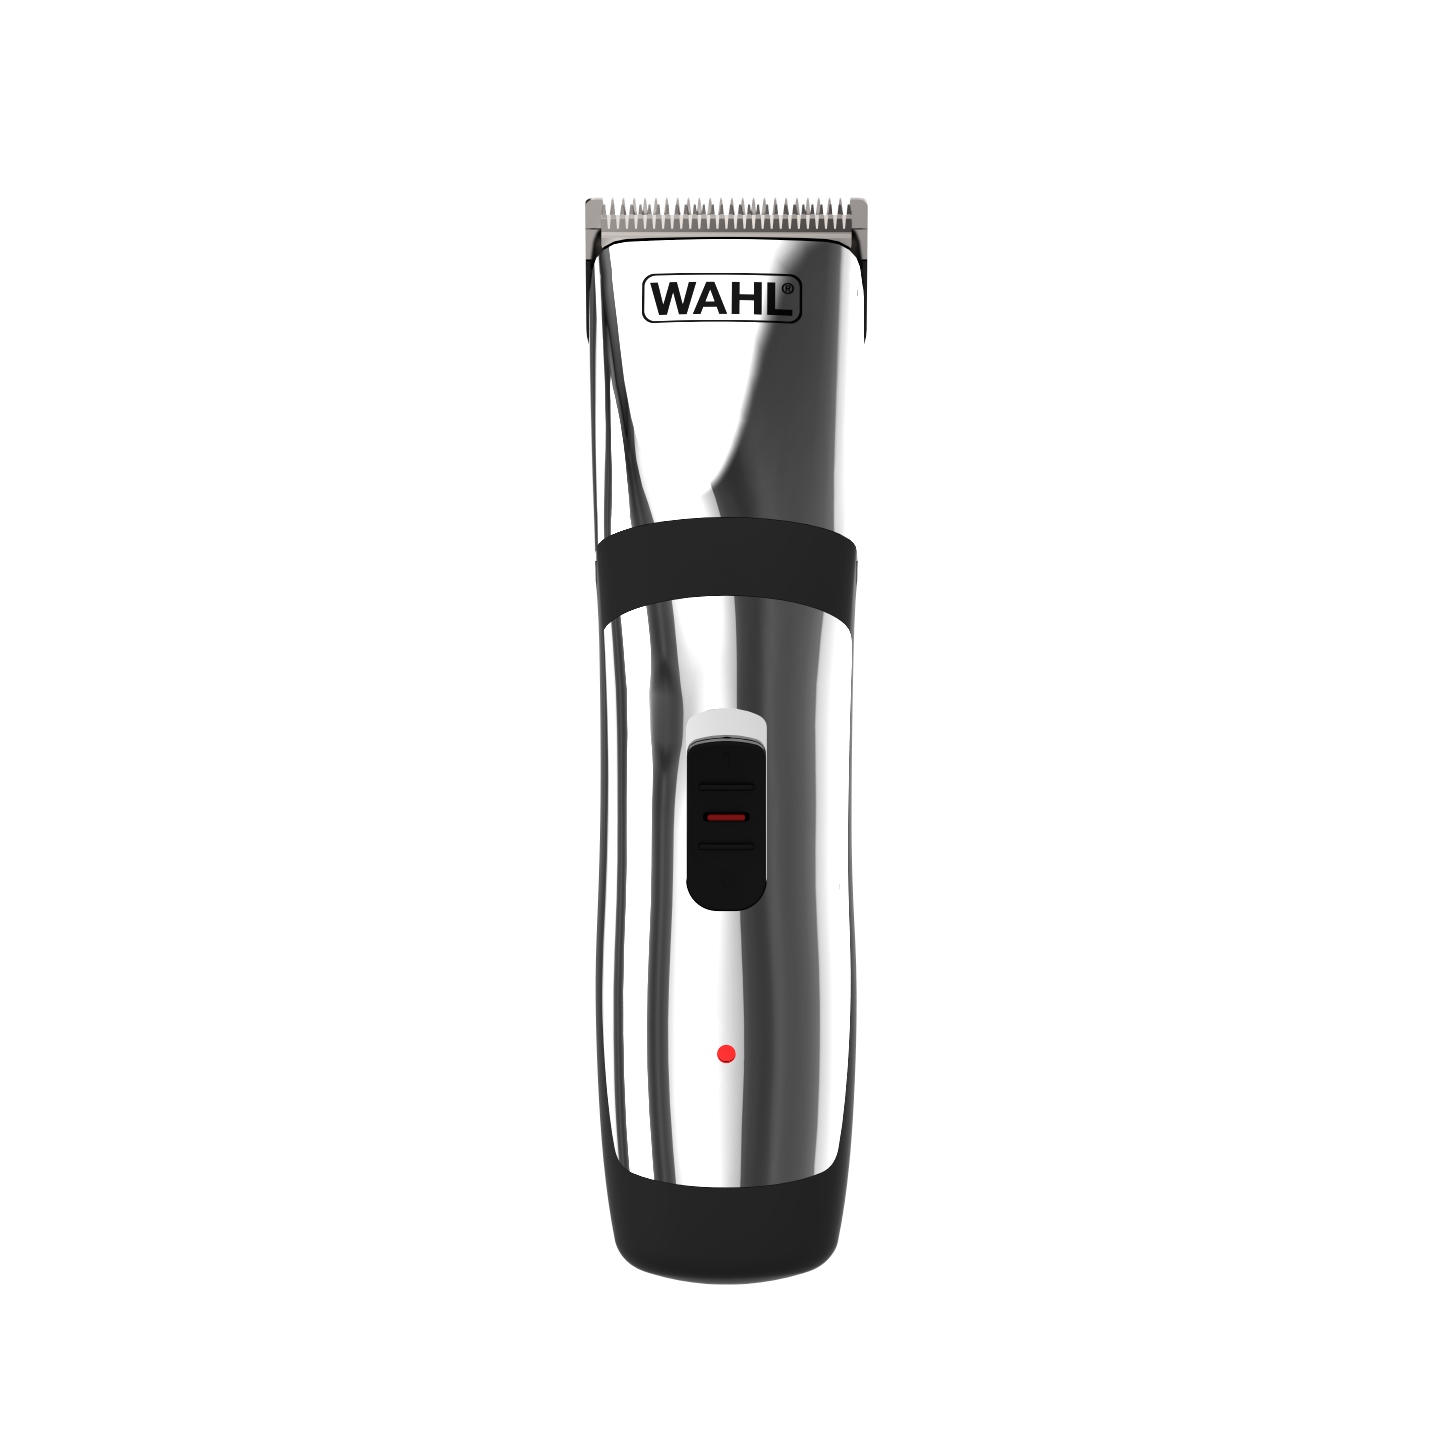 cordless clipper and trimmer set